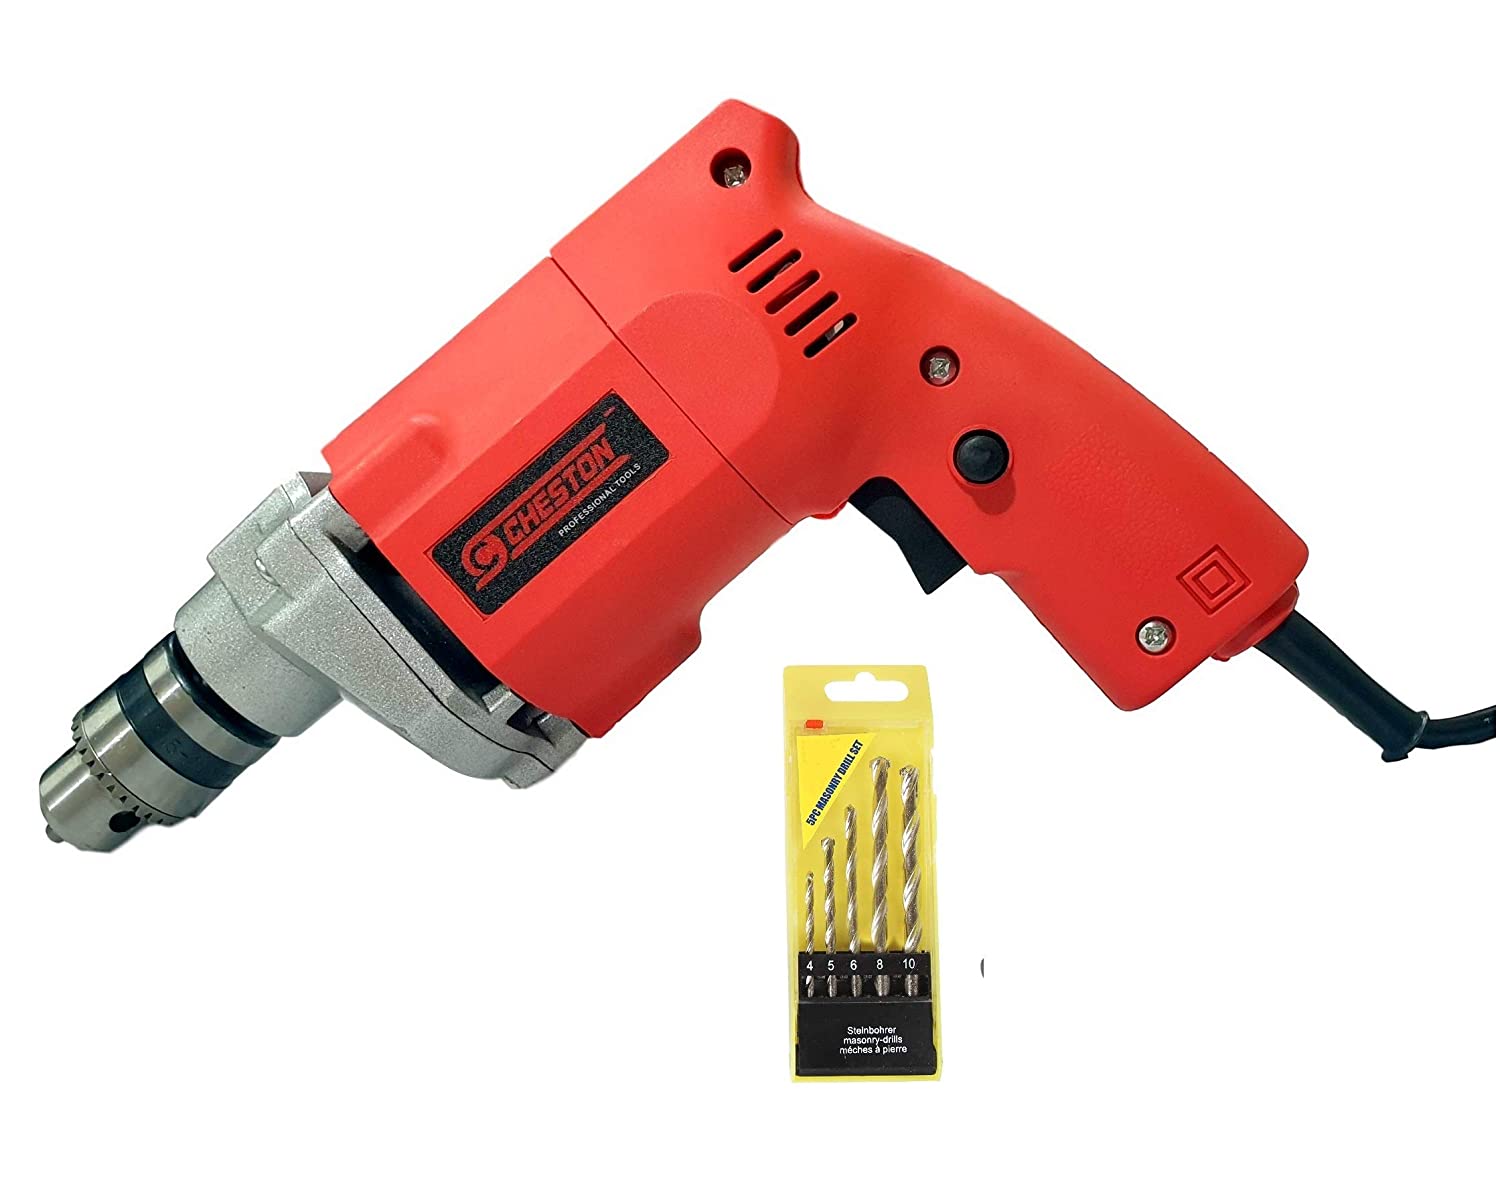 drill machine for home use - Cheston 10mm Powerful Drill Machine for Wall, Metal, Wood Drilling with 19 HSS bits for Drilling in Wood, Metal, Plastic